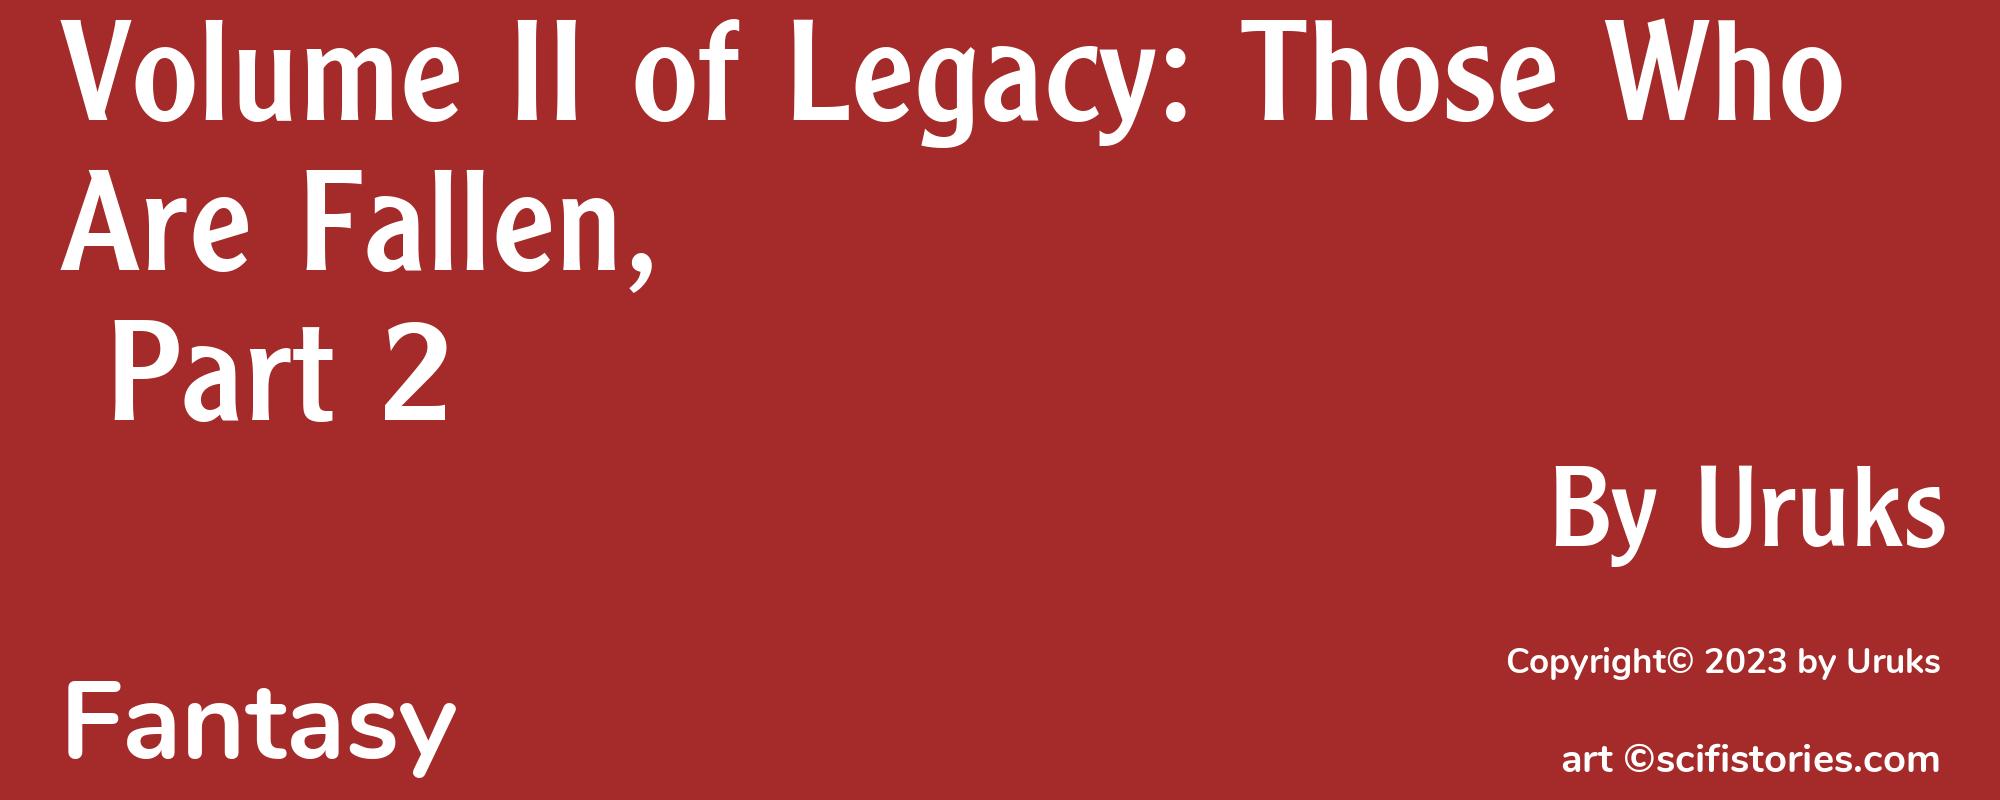 Volume II of Legacy: Those Who Are Fallen, Part 2 - Cover